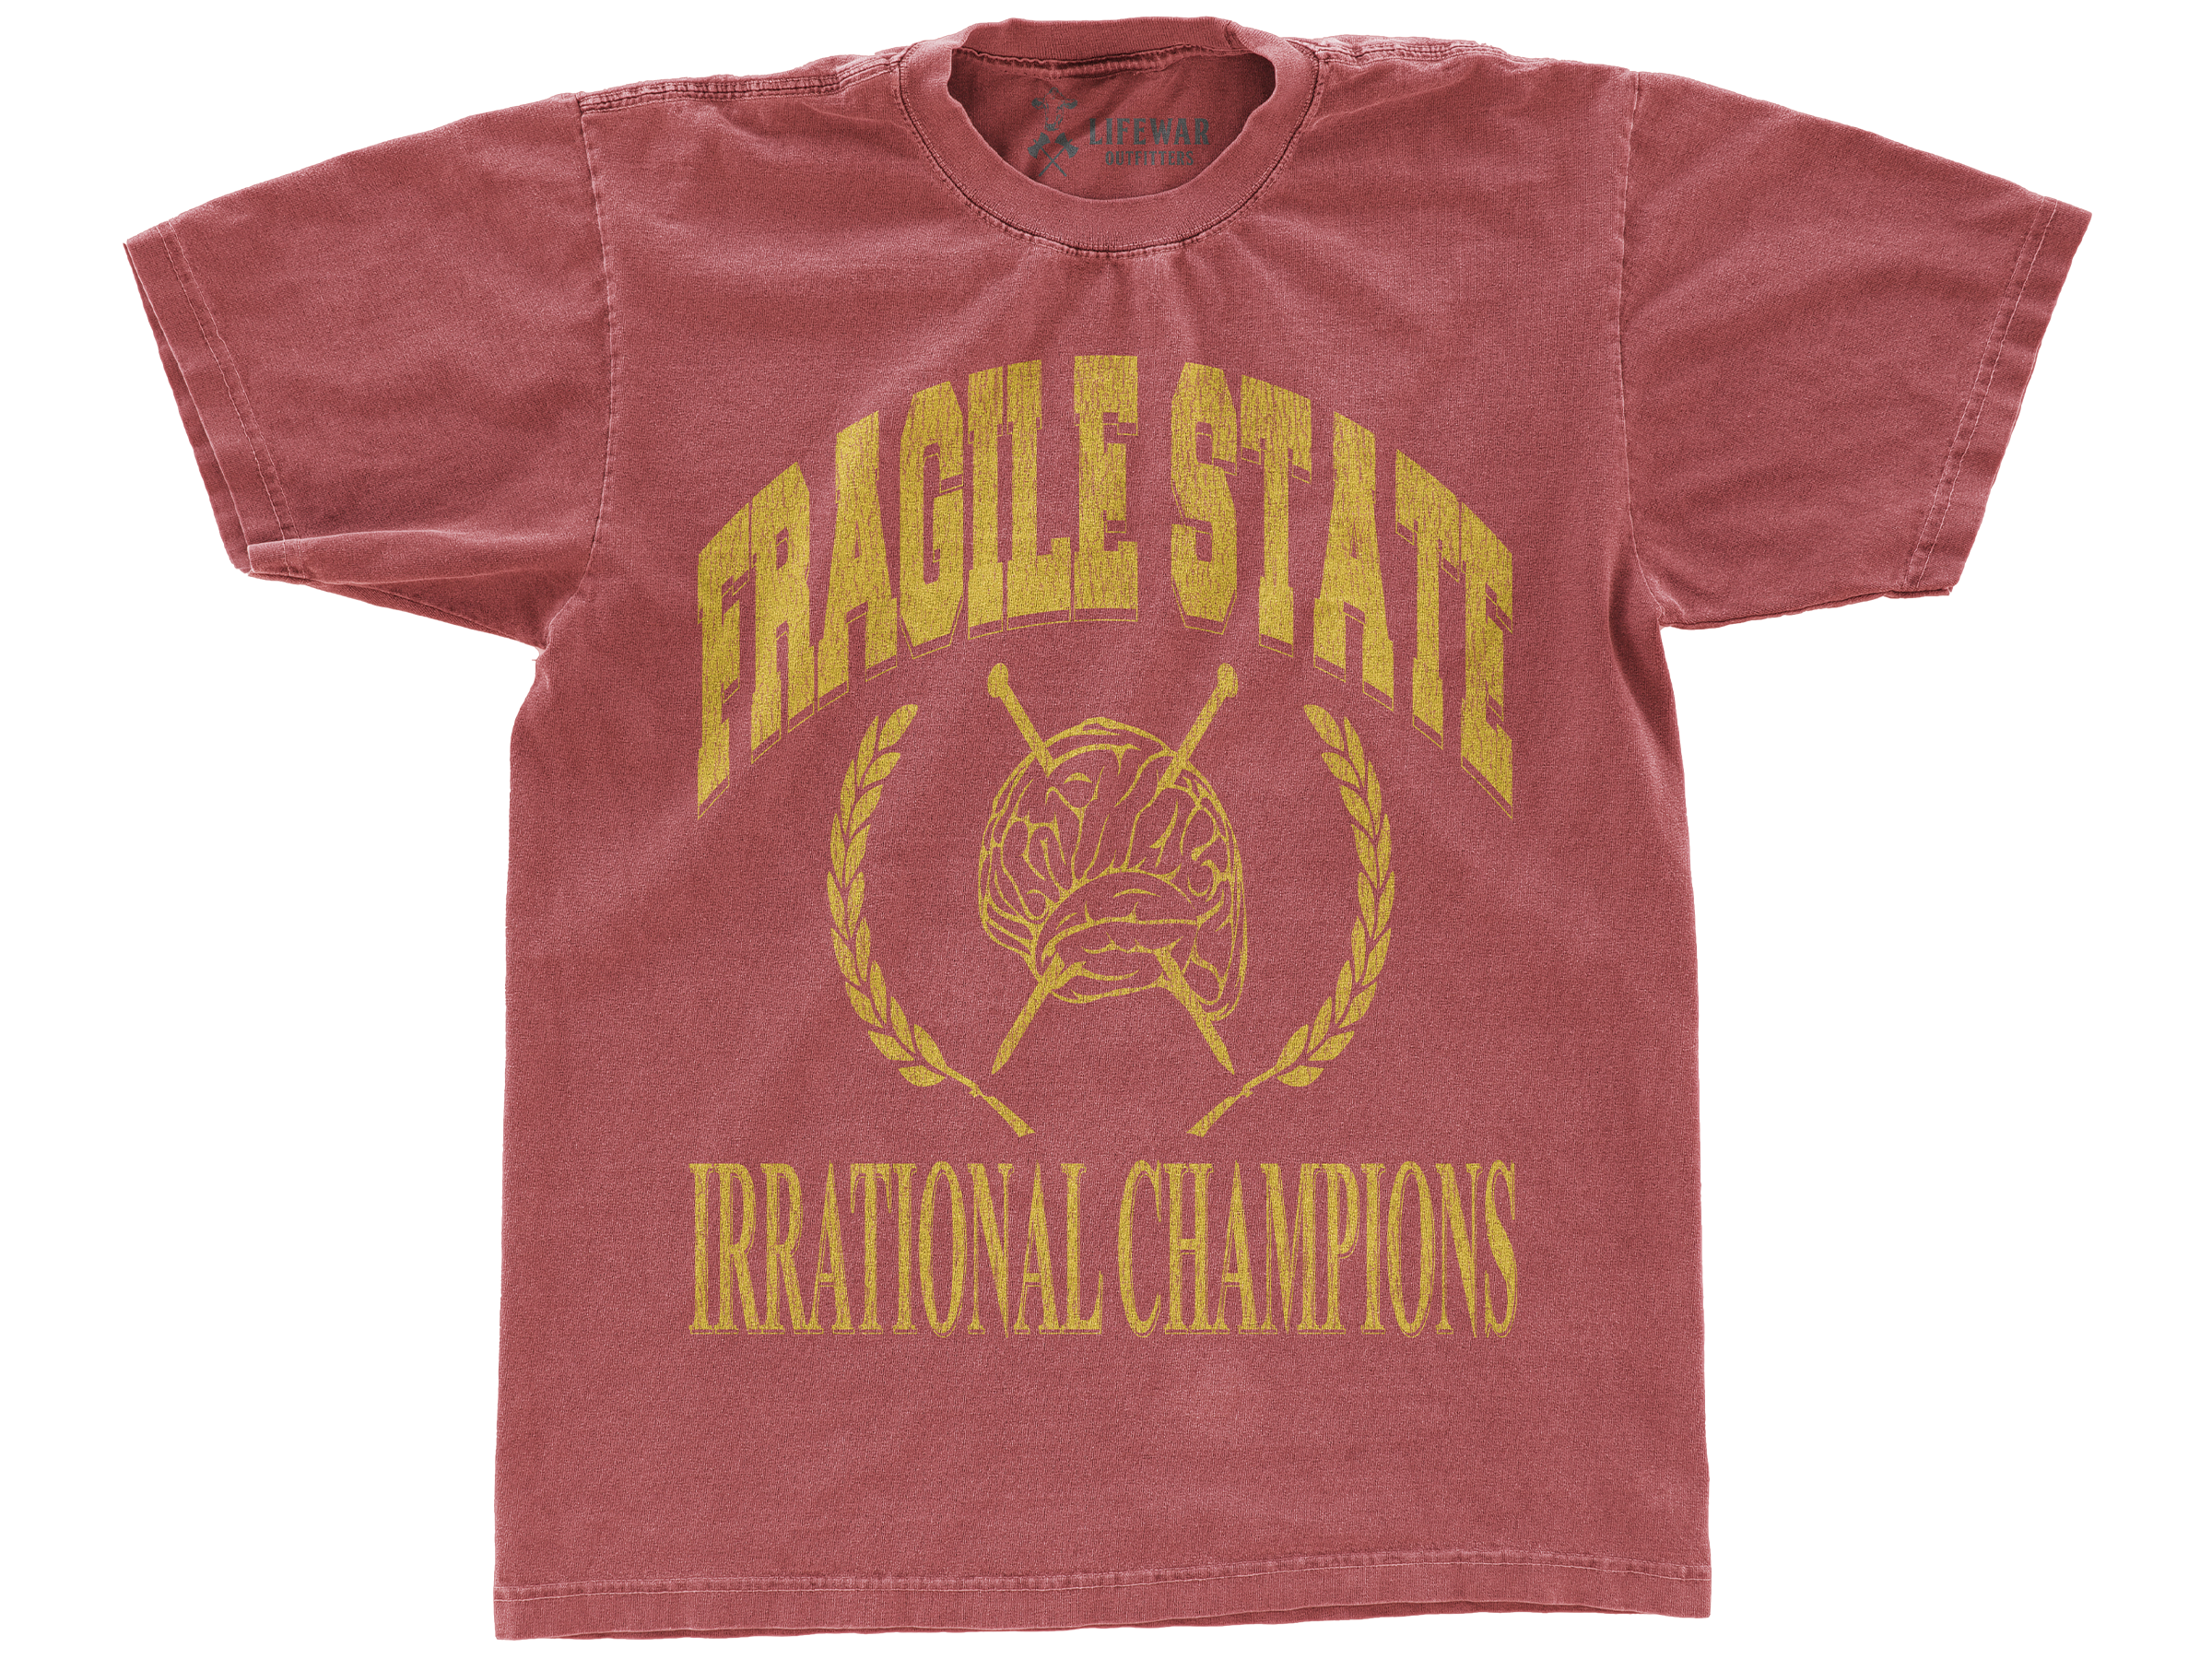 FRAGILE STATE (T-SHIRT)